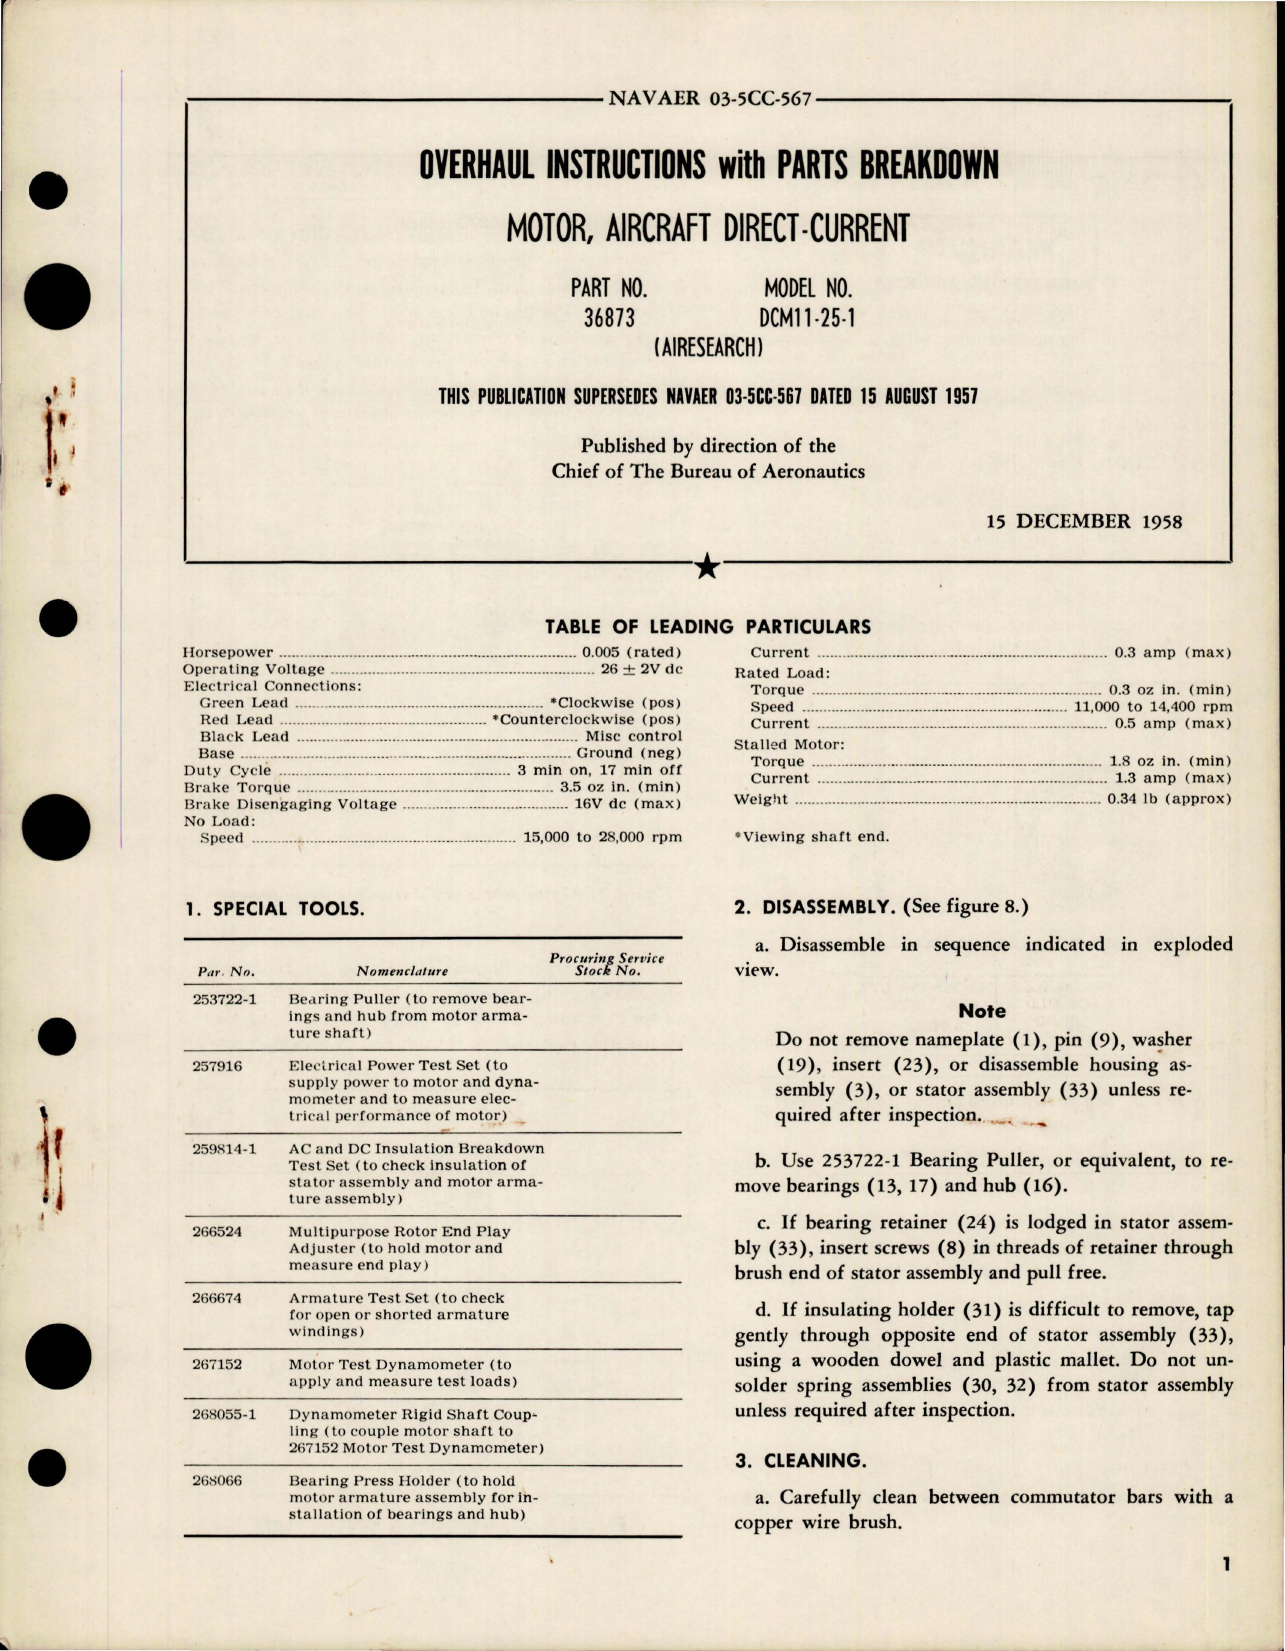 Sample page 1 from AirCorps Library document: Overhaul Instructions with Parts Breakdown for Aircraft Direct Current Motor - Part 36873 - Model DCM11-25-1